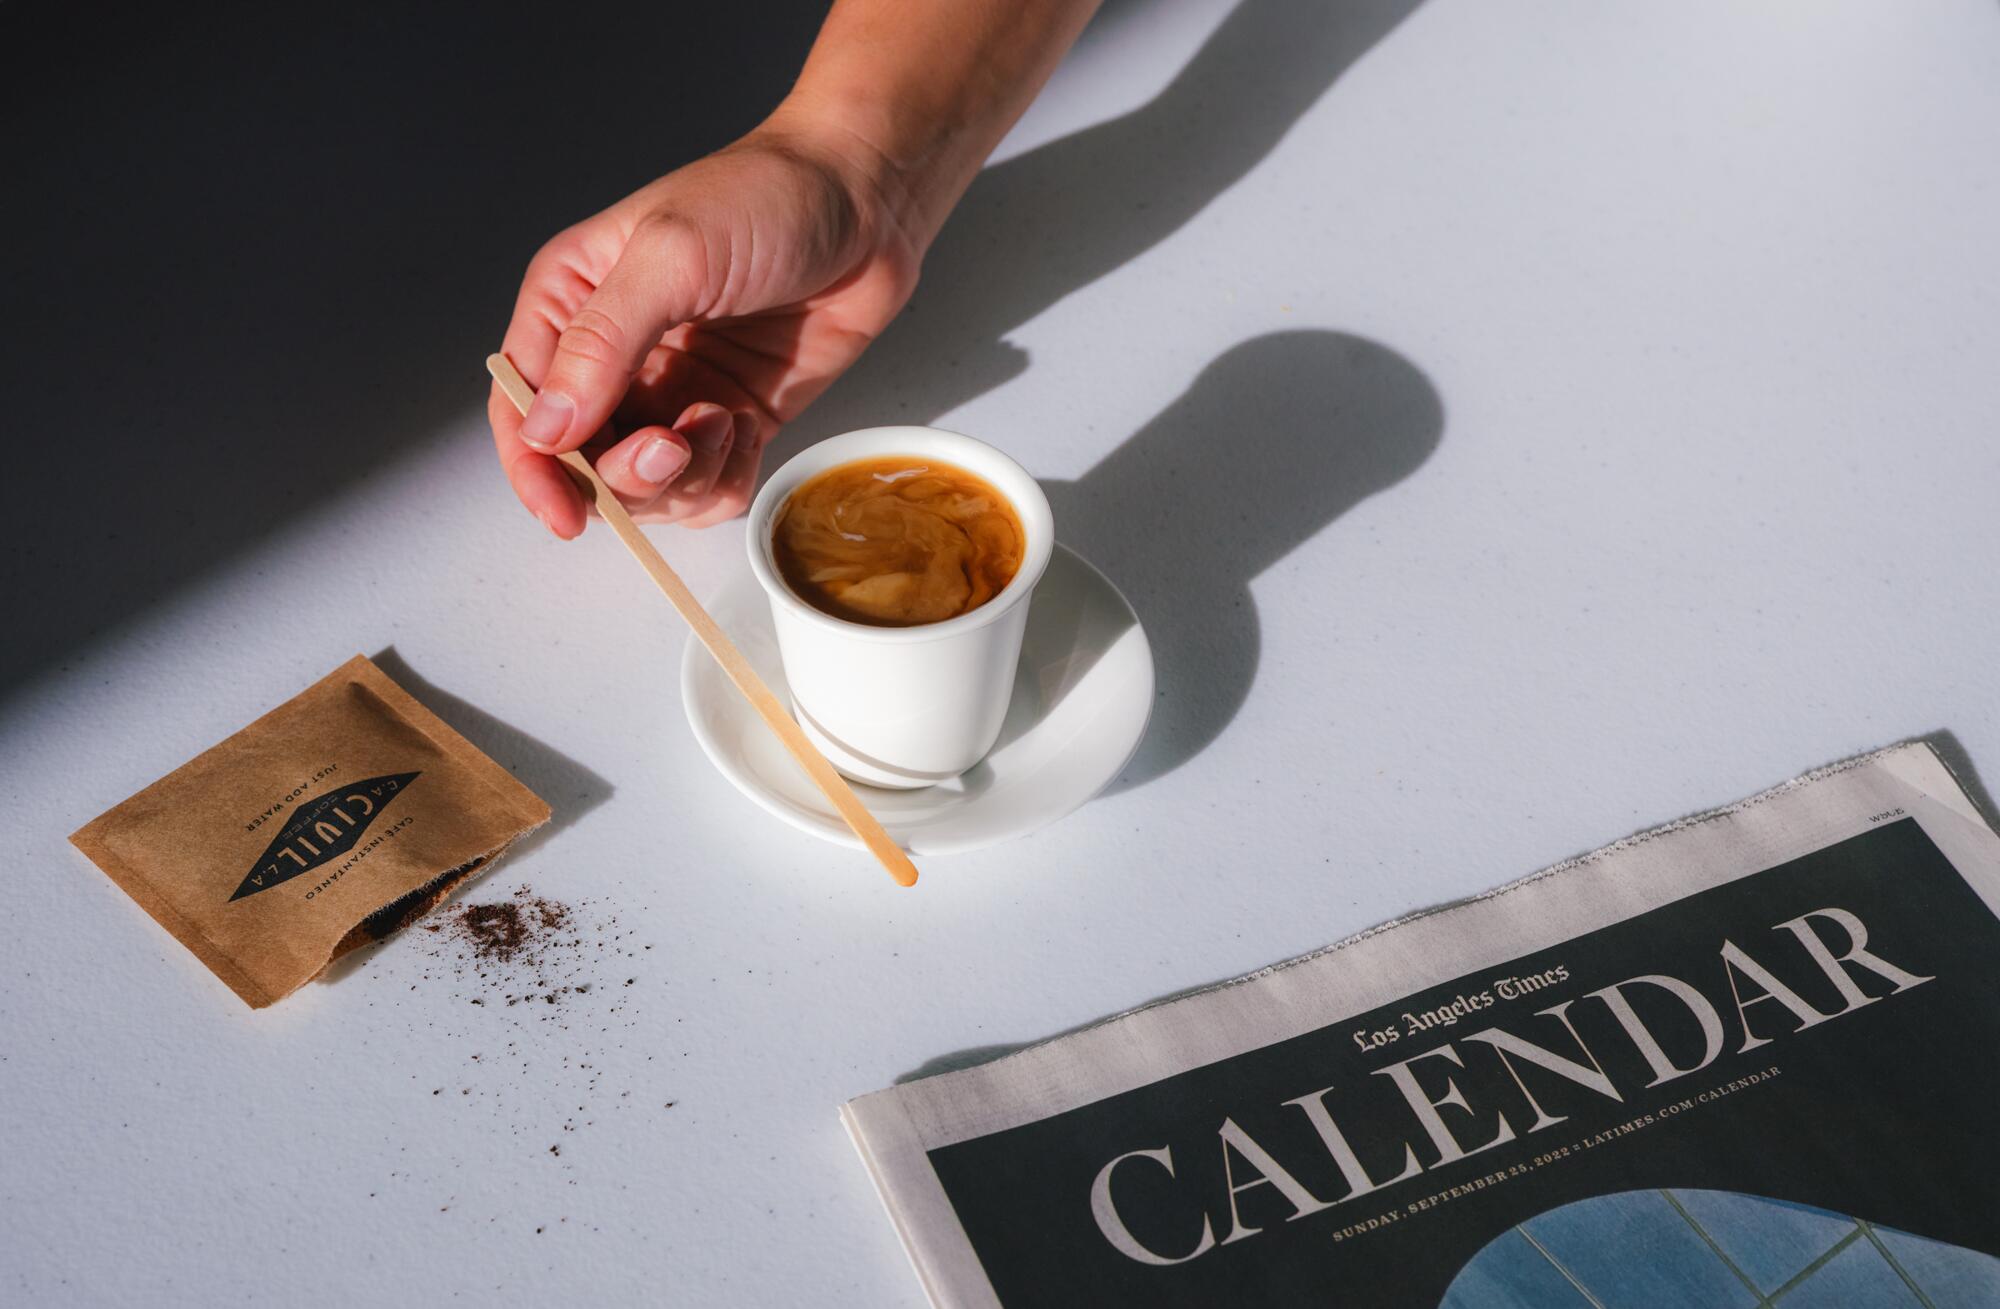 A hand holds a coffee stirrer next to a cup of coffee on a saucer, with an open packet of instant coffee next to it.